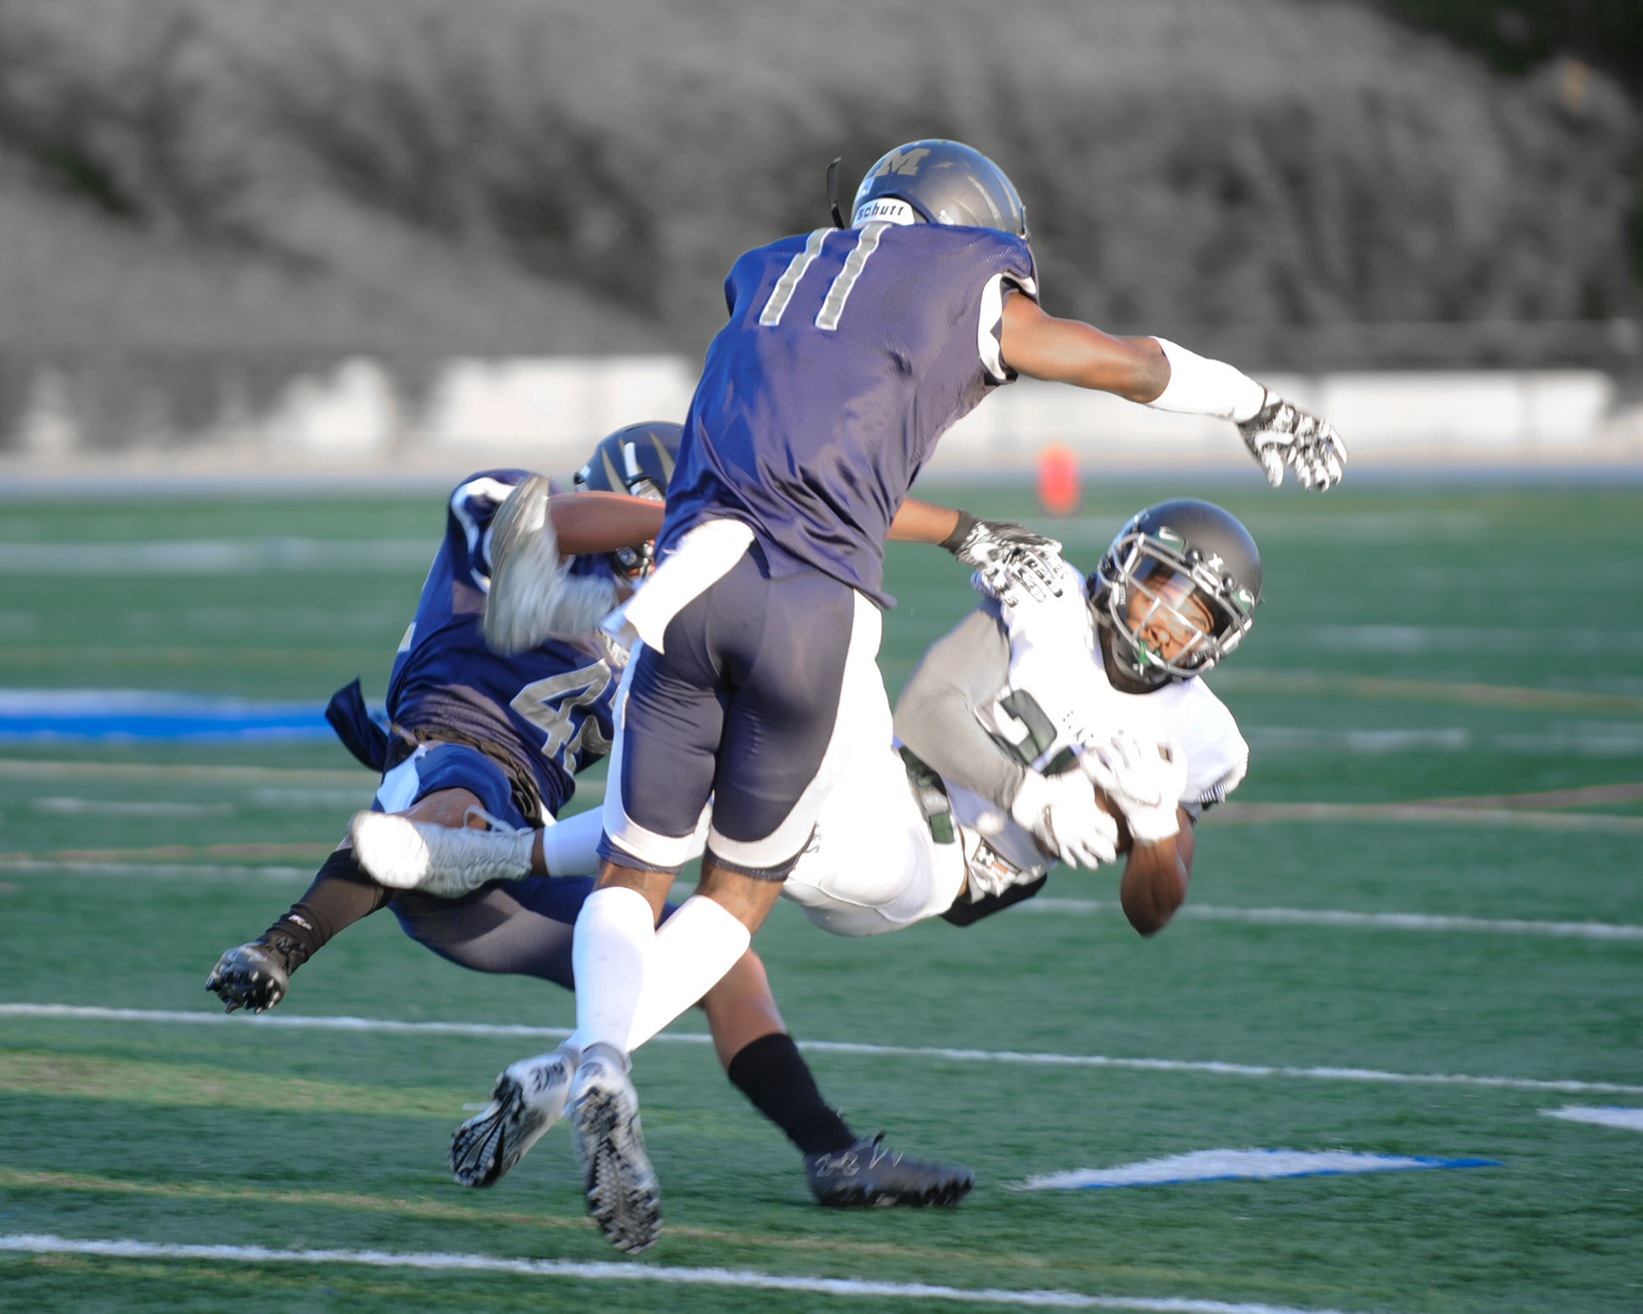 East Los Angeles College sophomore wide receiver Antoise Fields' air bound acrobats hauls in a pass in a 21-13 Huskies win at San Diego Mesa. (Photo by Tadzio Garcia)